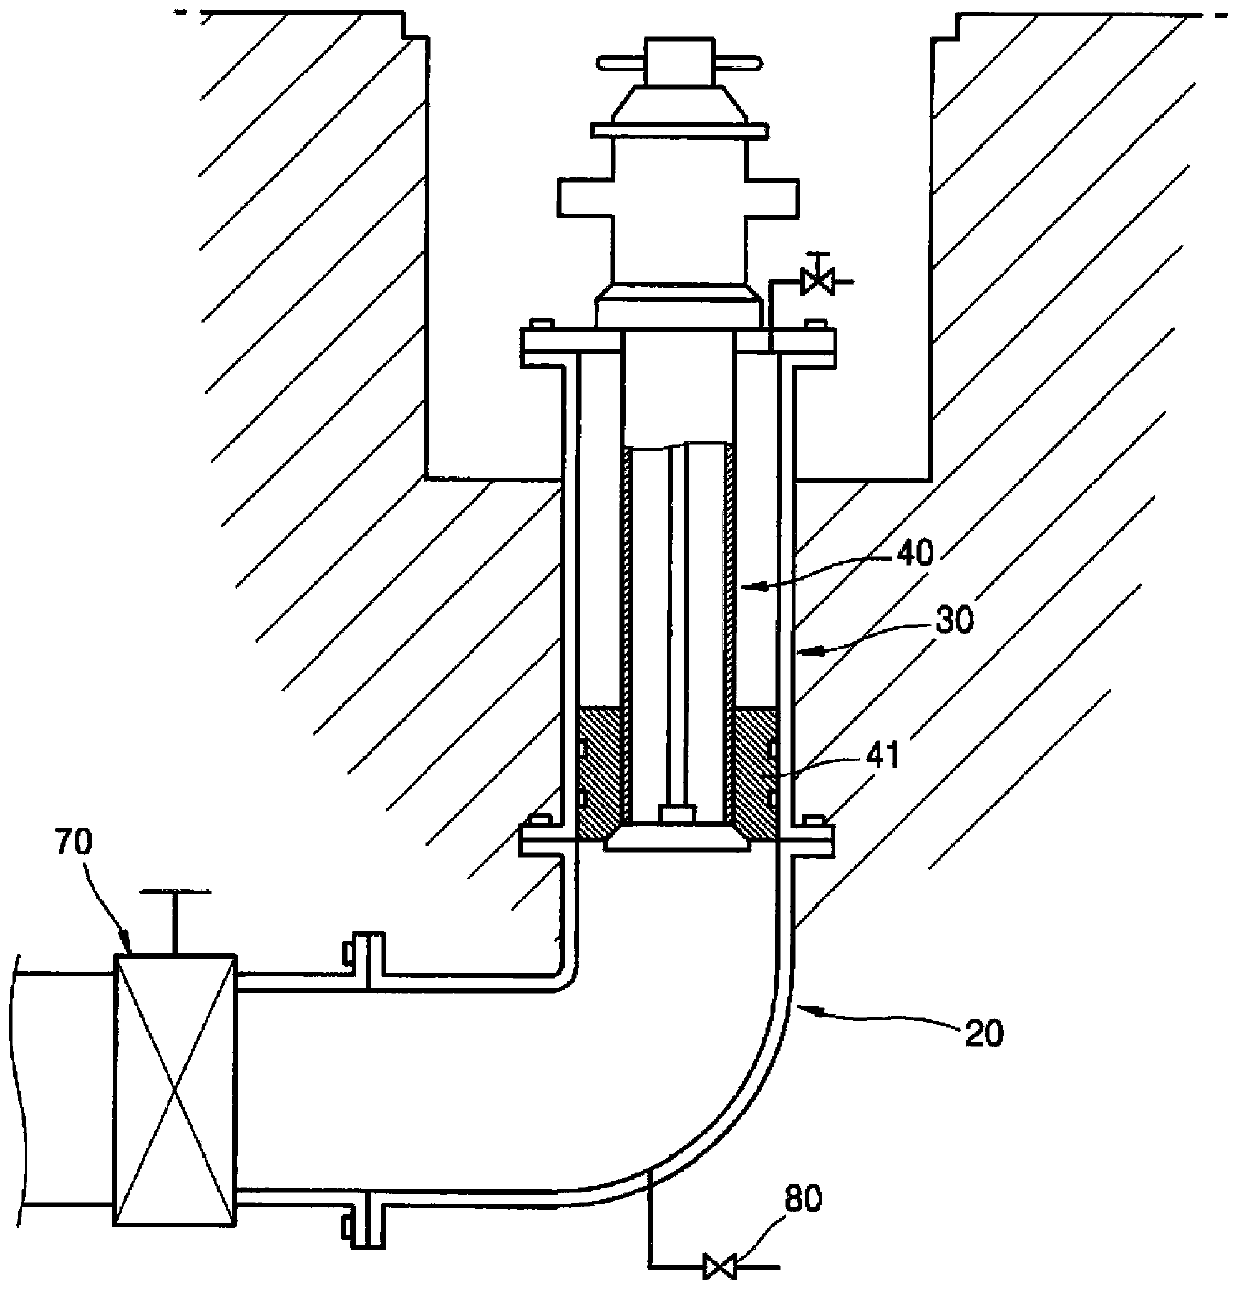 Fire hydrant assembly with check valve